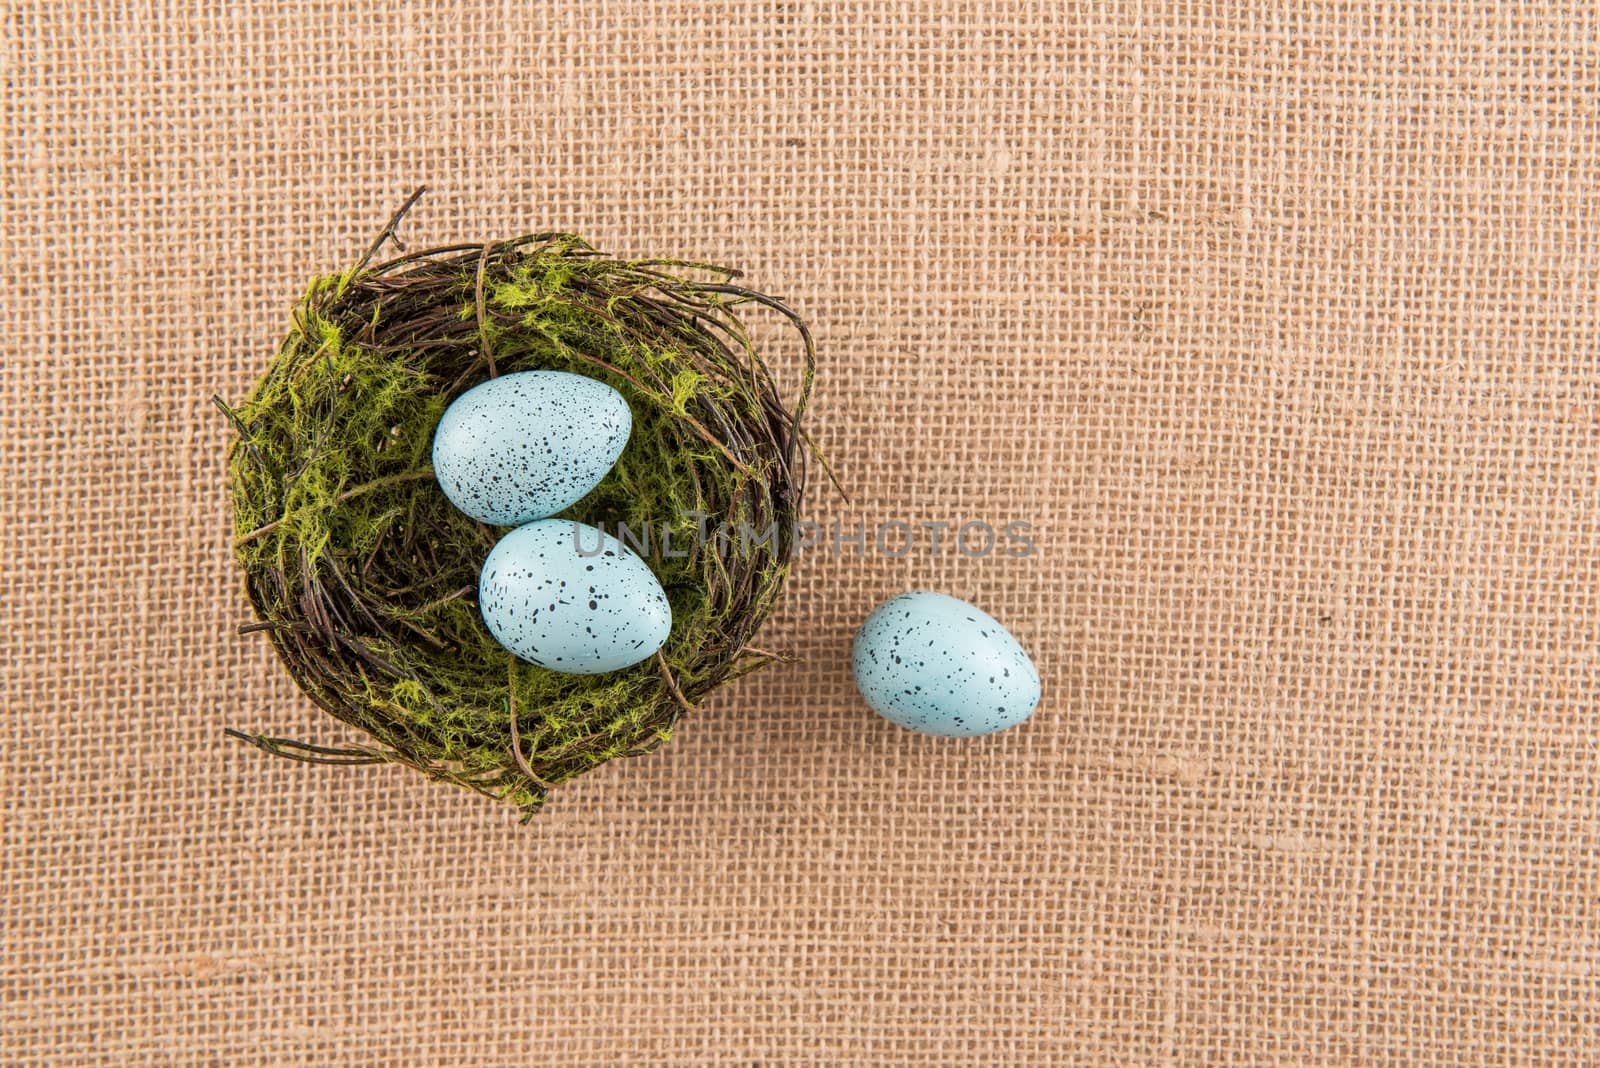 Blue Speckled Eggs and Mossy Nest by krisblackphotography